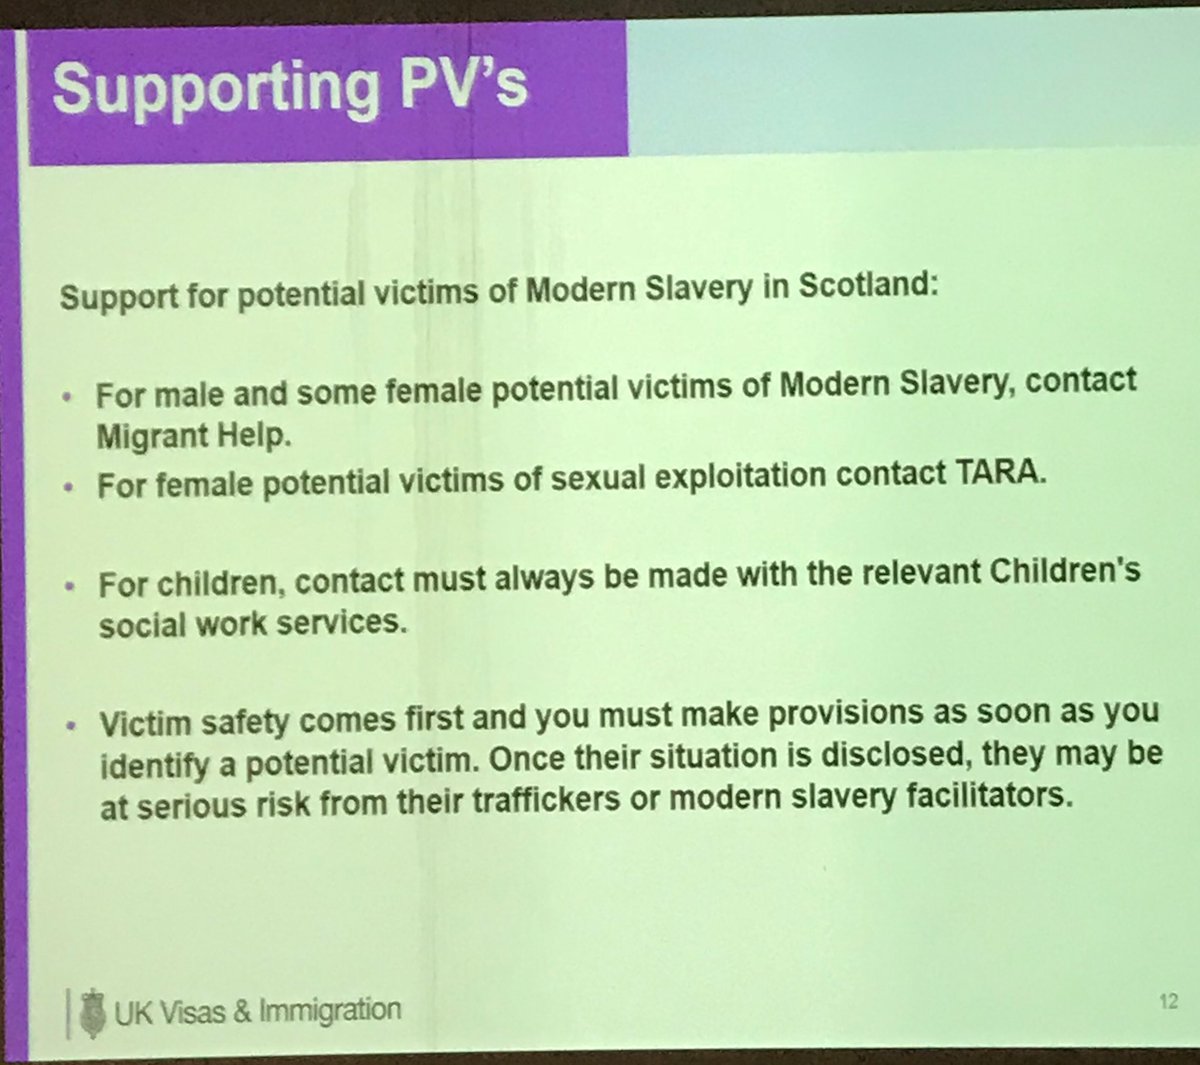 Make sure you know the support for potential victims of #HumanTrafficking in Scotland and share with colleagues ⁦@QNI_Scotland⁩ ⁦@HilaryAlba2⁩ ⁦@NHSGGC⁩ ⁦⁦@QMUNursing⁩ ⁦@HeatherBain9⁩ @Helenakelly73⁩ ⁦@careylunan⁩